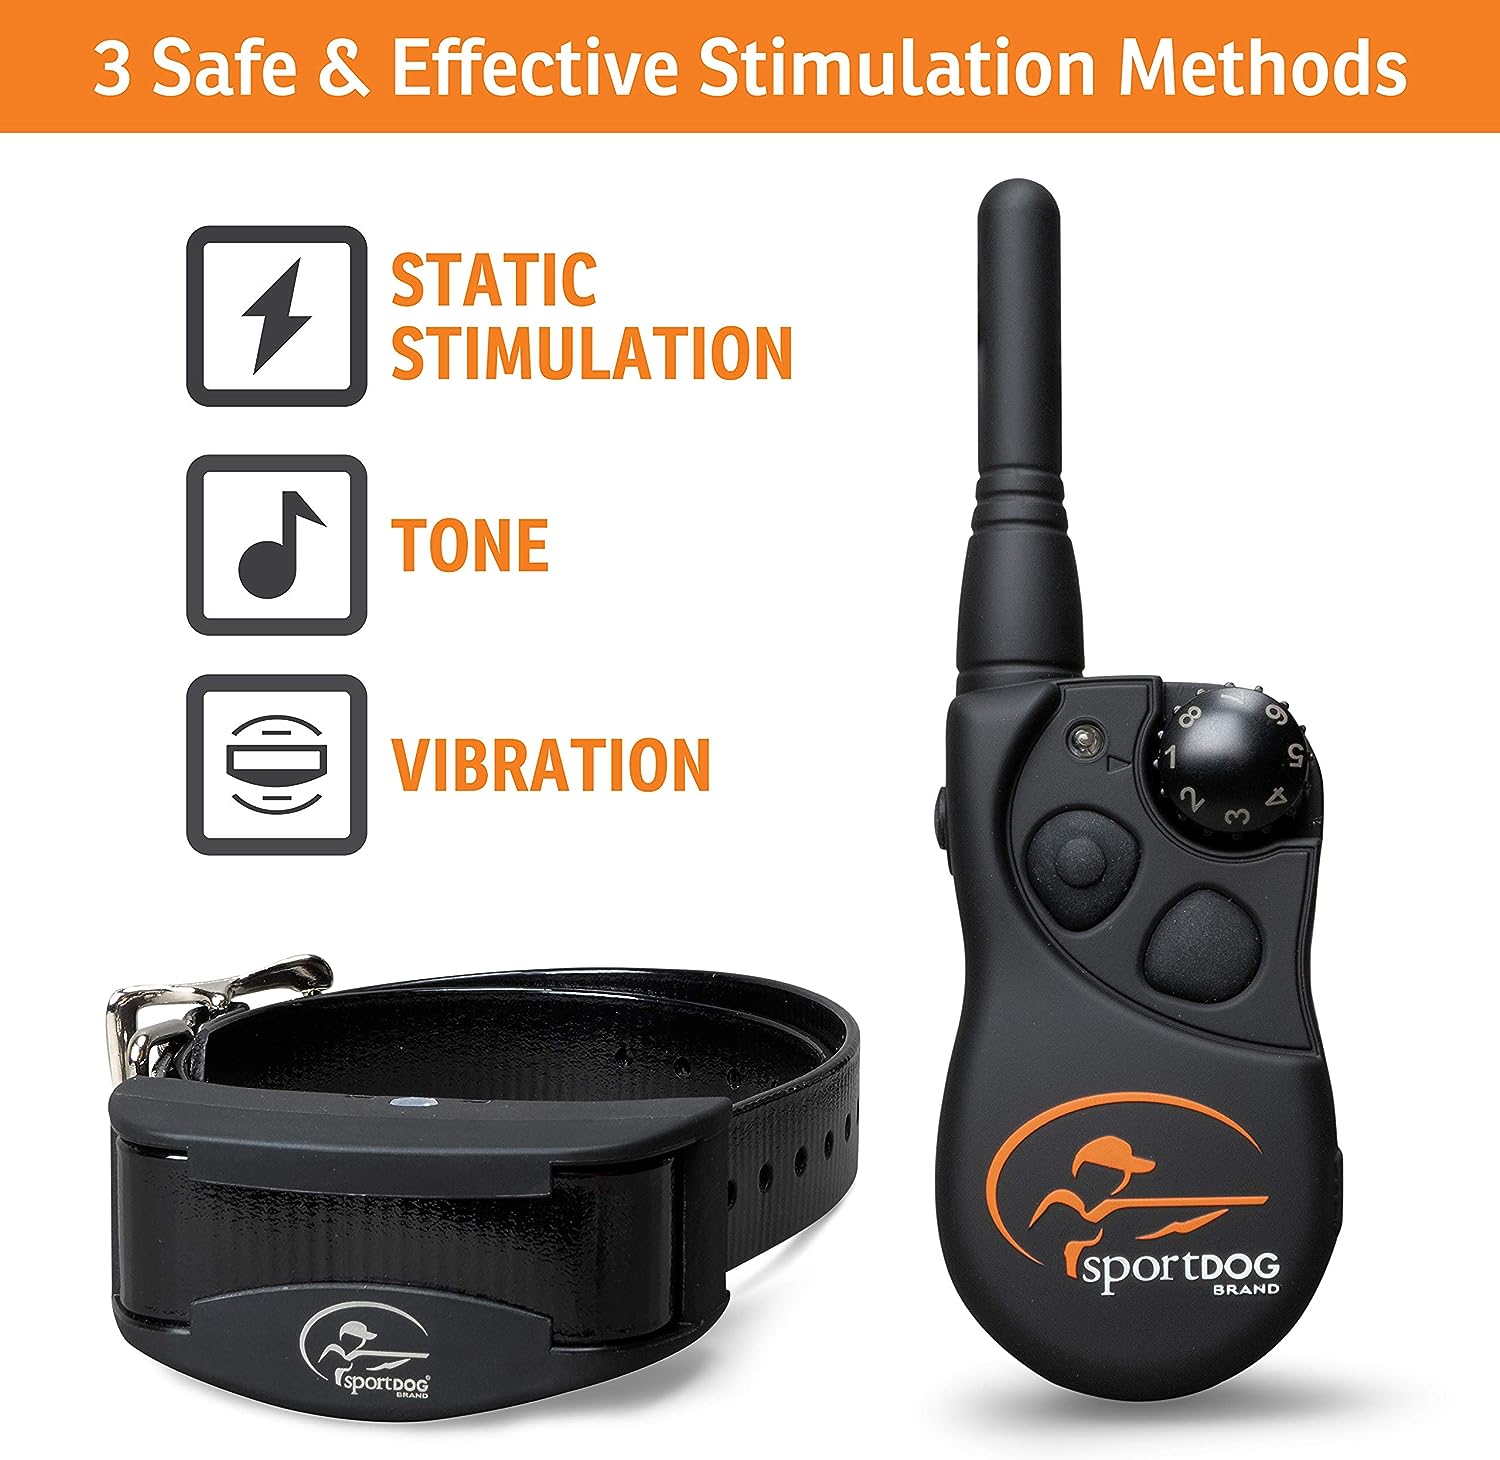 SportDOG Brand YardTrainer Family Remote Trainers - Rechargeable, Waterproof Dog Training Collars with Static, Vibrate, and Tone, 100 Yard Range - YT-100